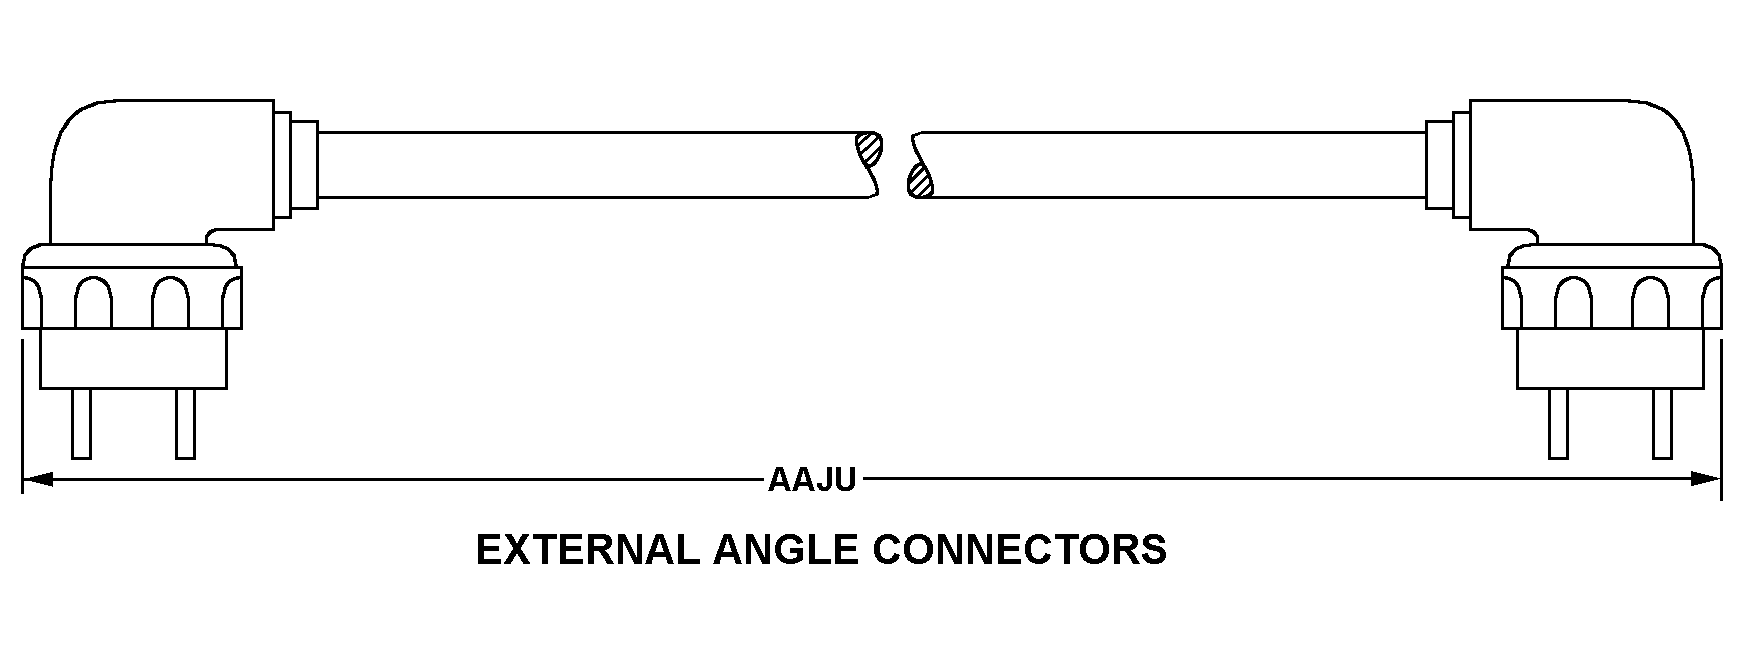 EXTERNAL ANGLE CONNECTORS style nsn 6150-01-226-6457